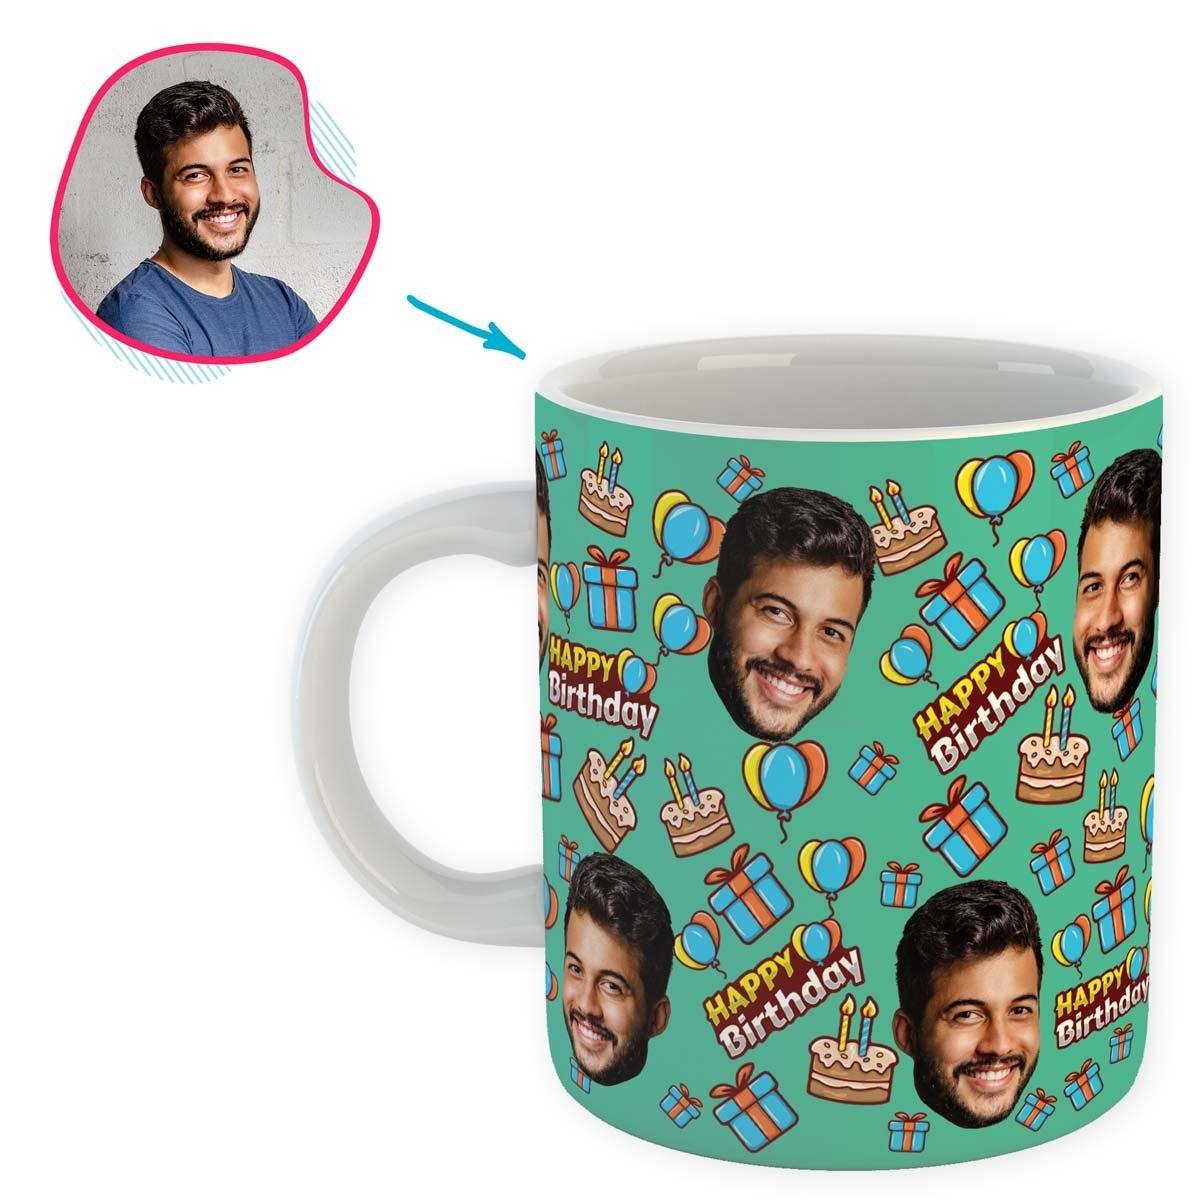 mint Birthday mug personalized with photo of face printed on it